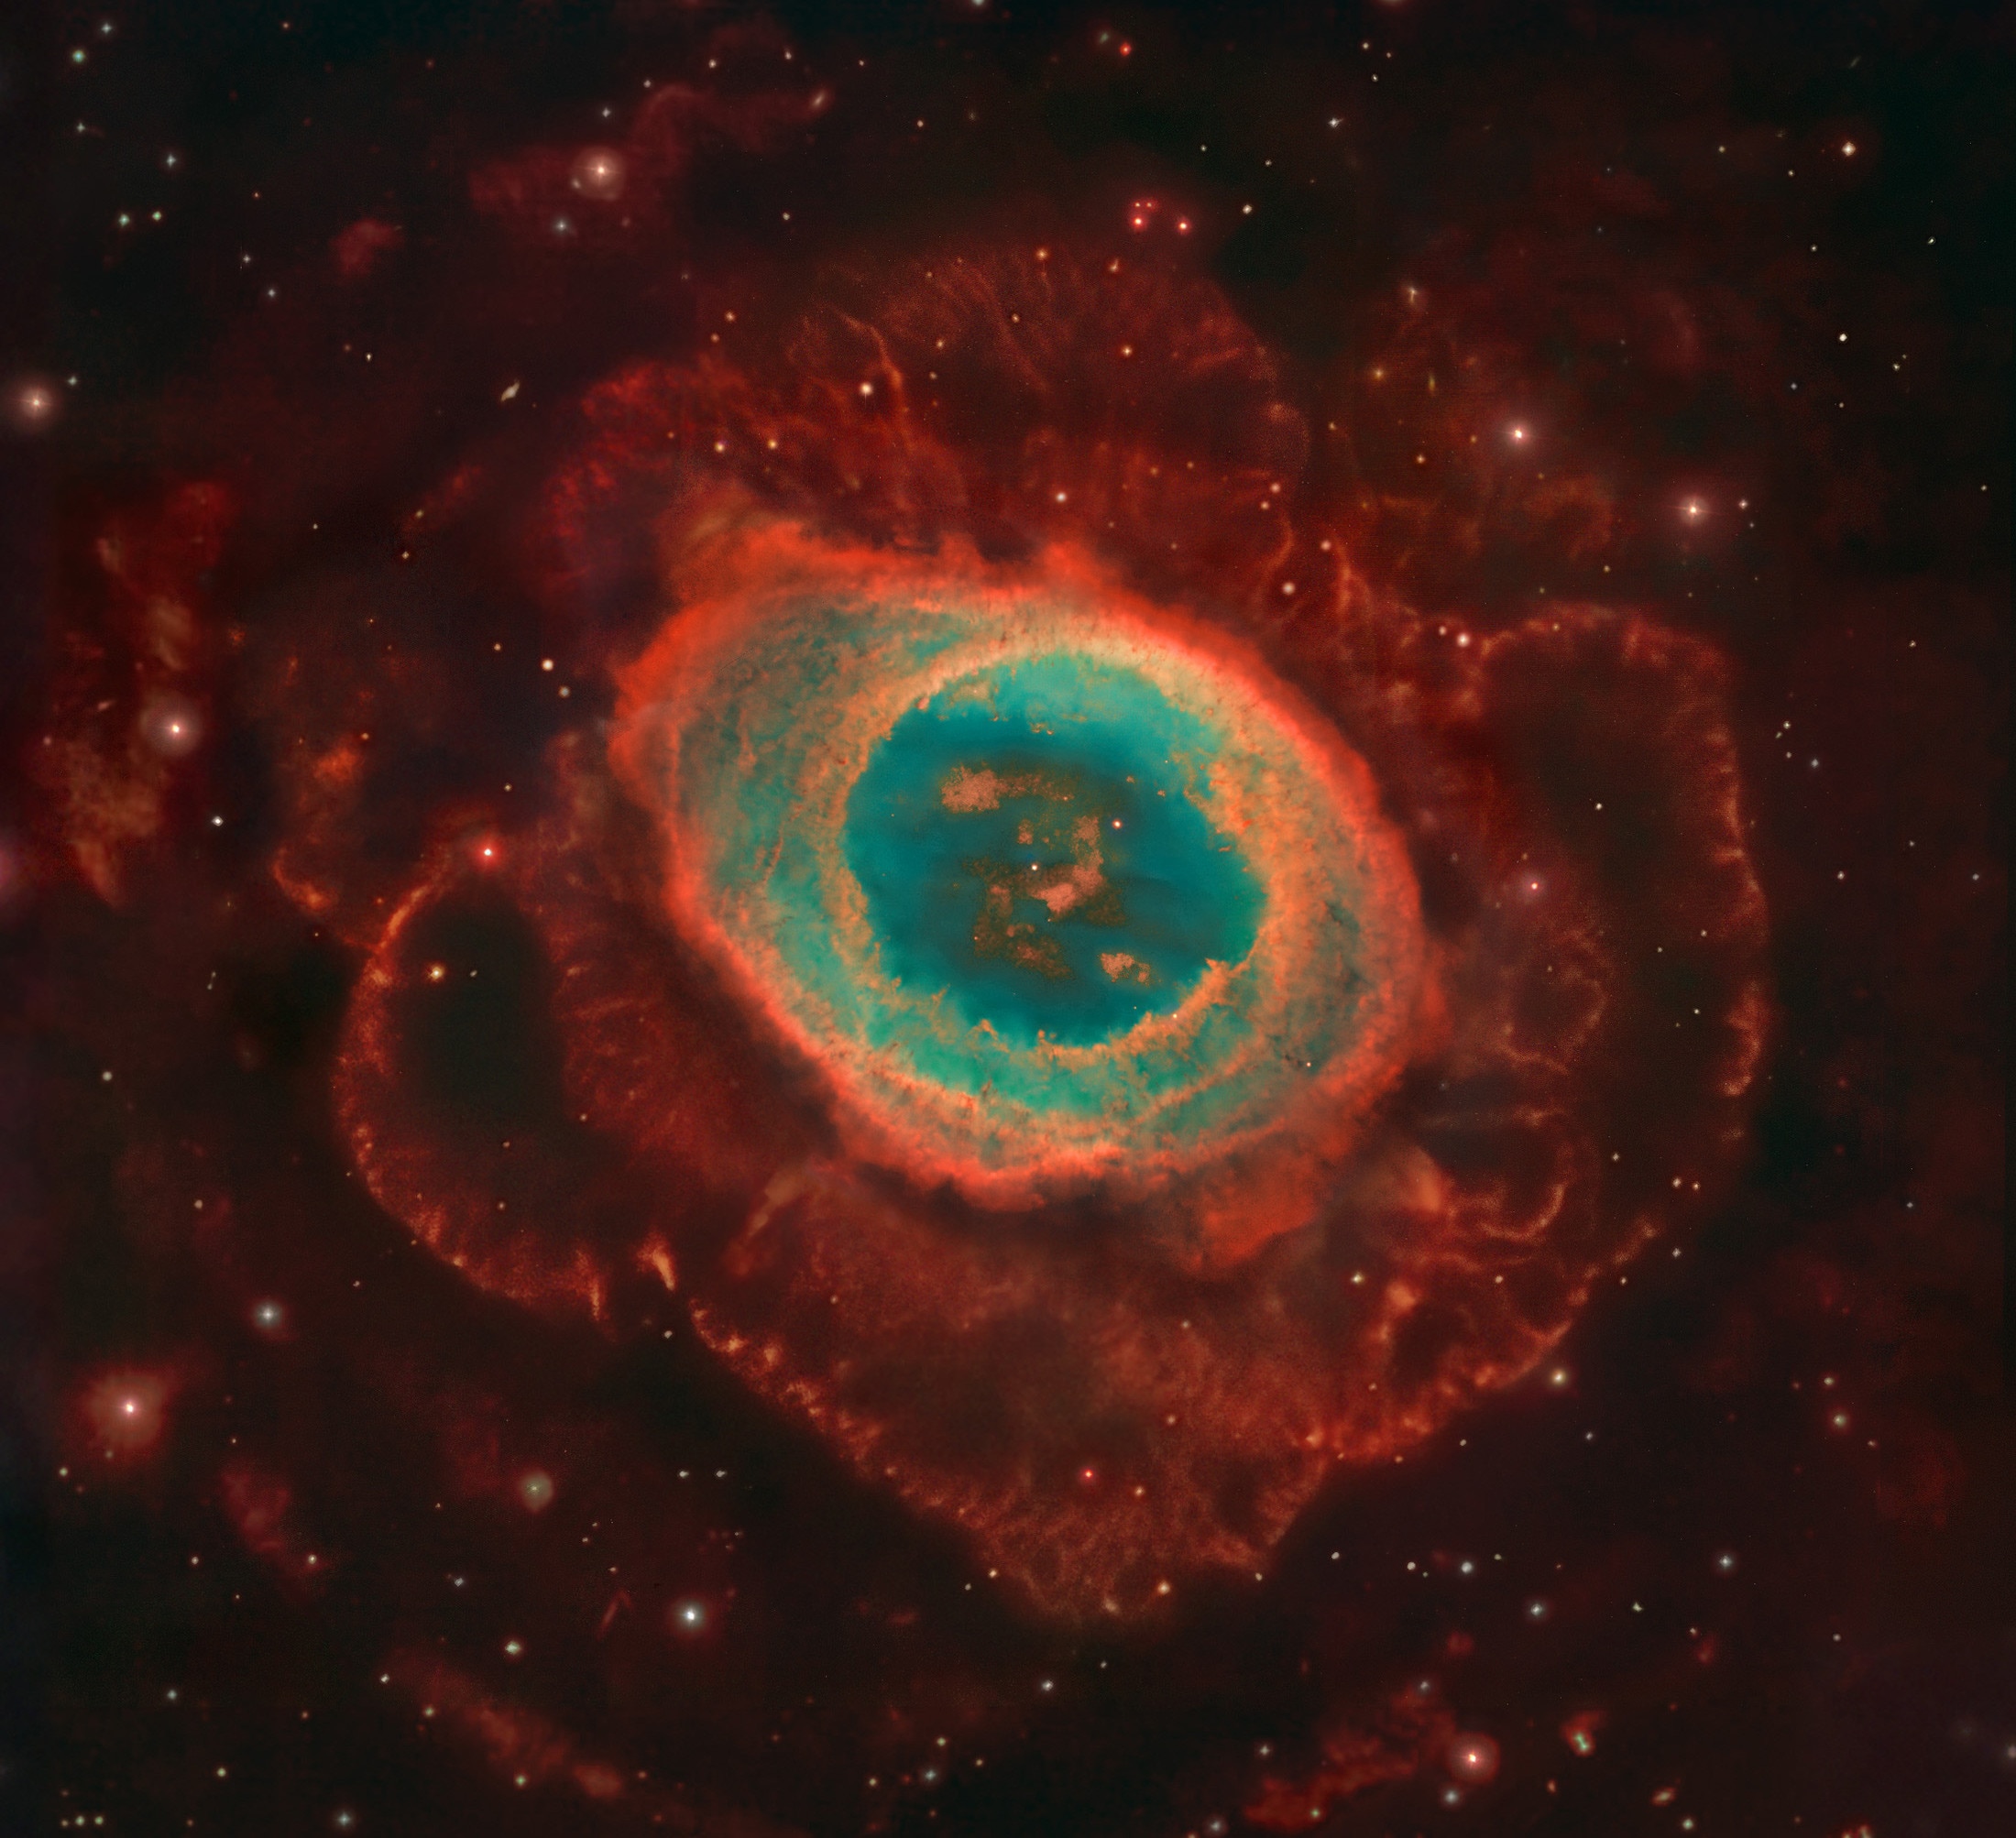 The glorious Ring Nebula, one of the finest examples of a dying star in the sky. Credit: NASA, ESA, and C. R. O'Dell (Vanderbilt University) and Robert Gendler